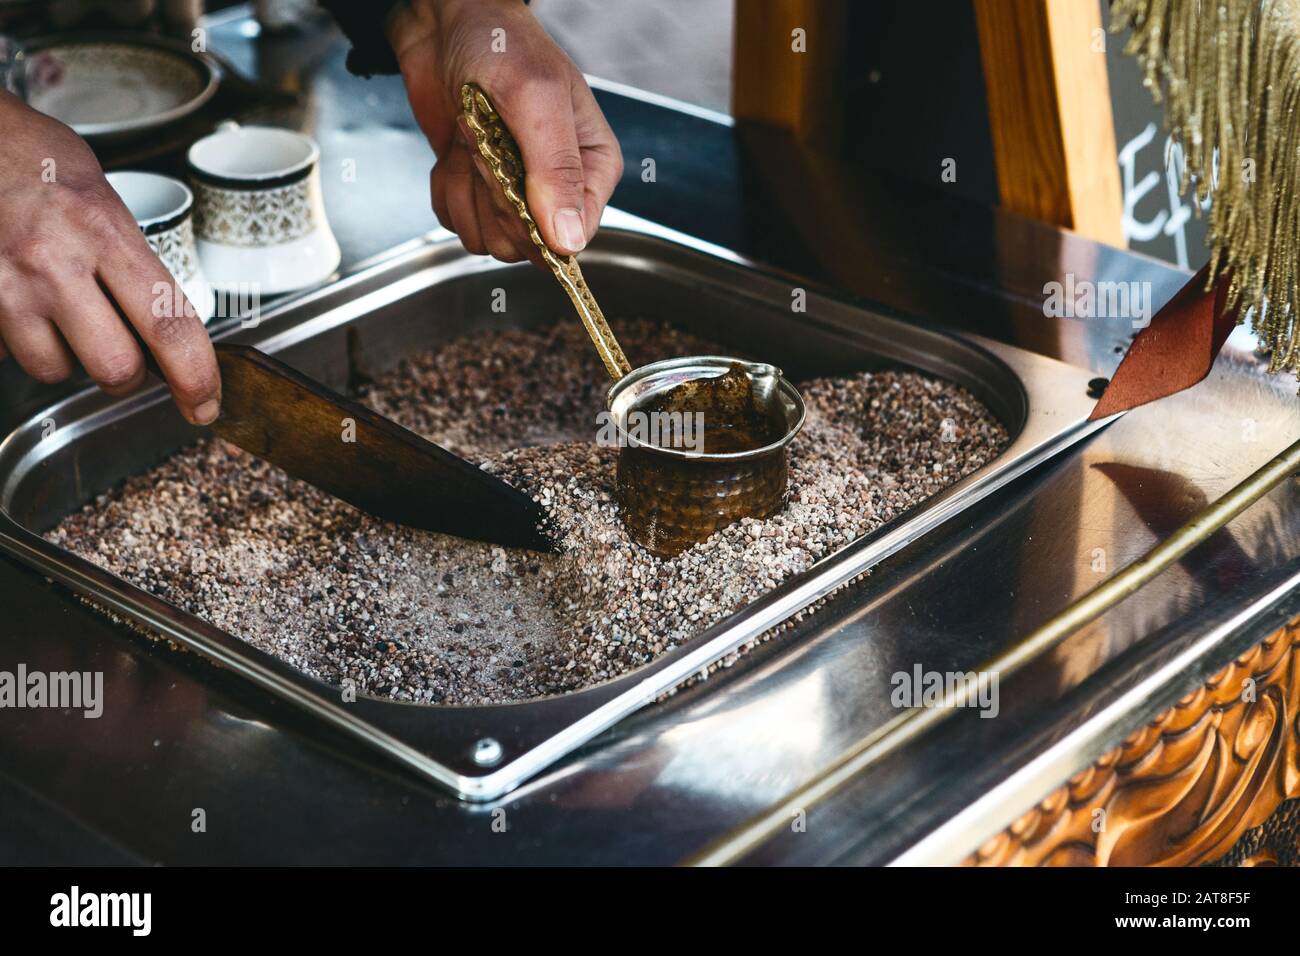 Making traditional black Turkish coffee or espresso in the sand in a special Turk. Stock Photo